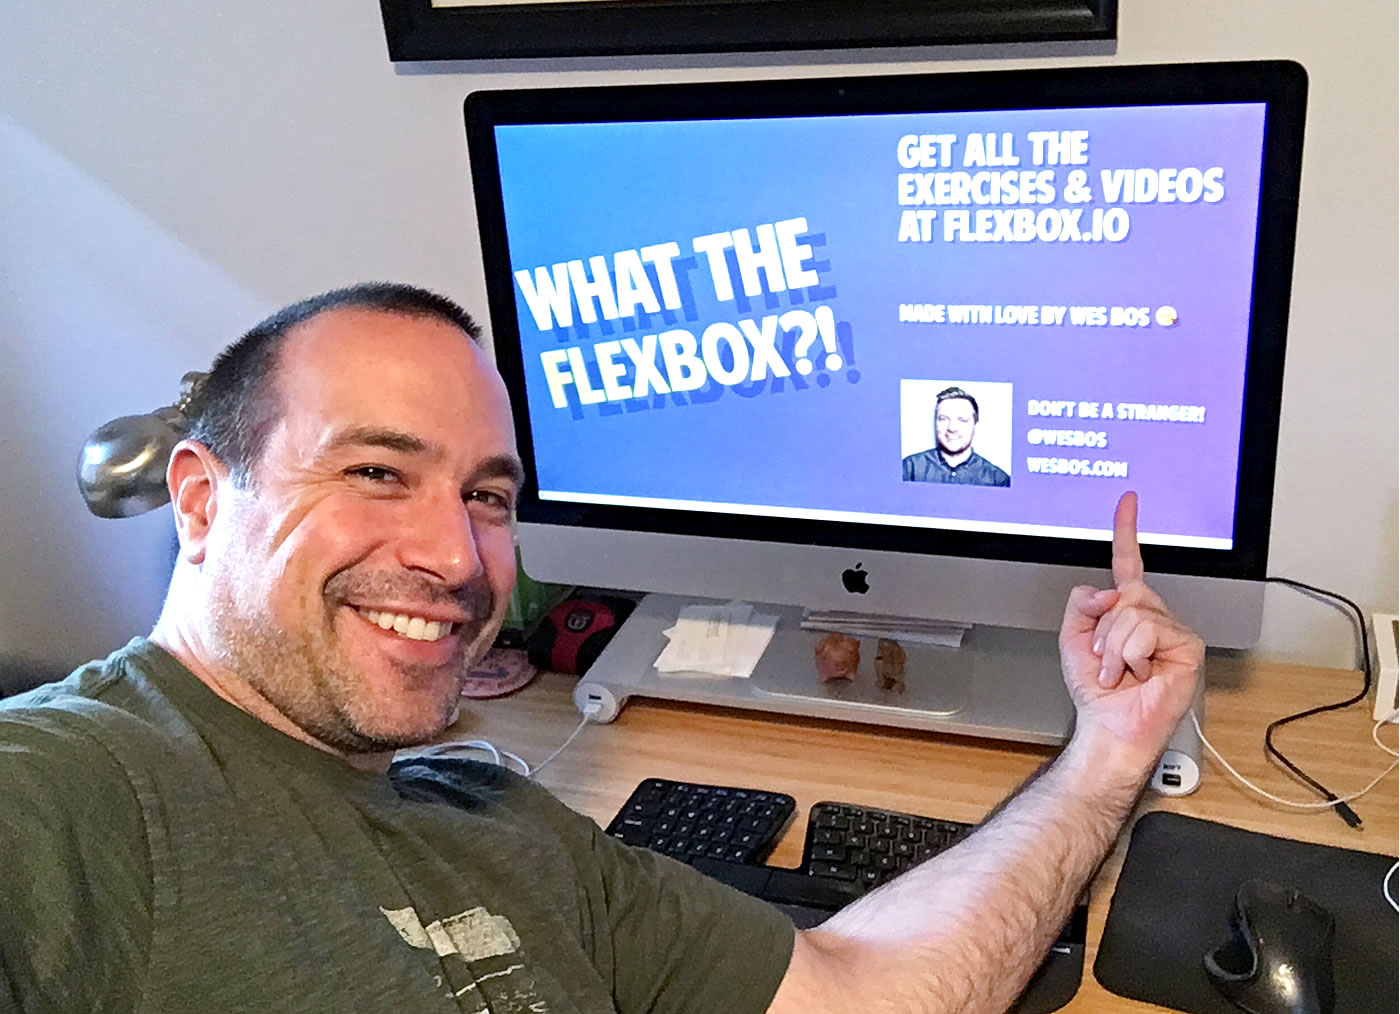 What The Flexbox - video coures by Wes Bos, review by Ben Nadel.